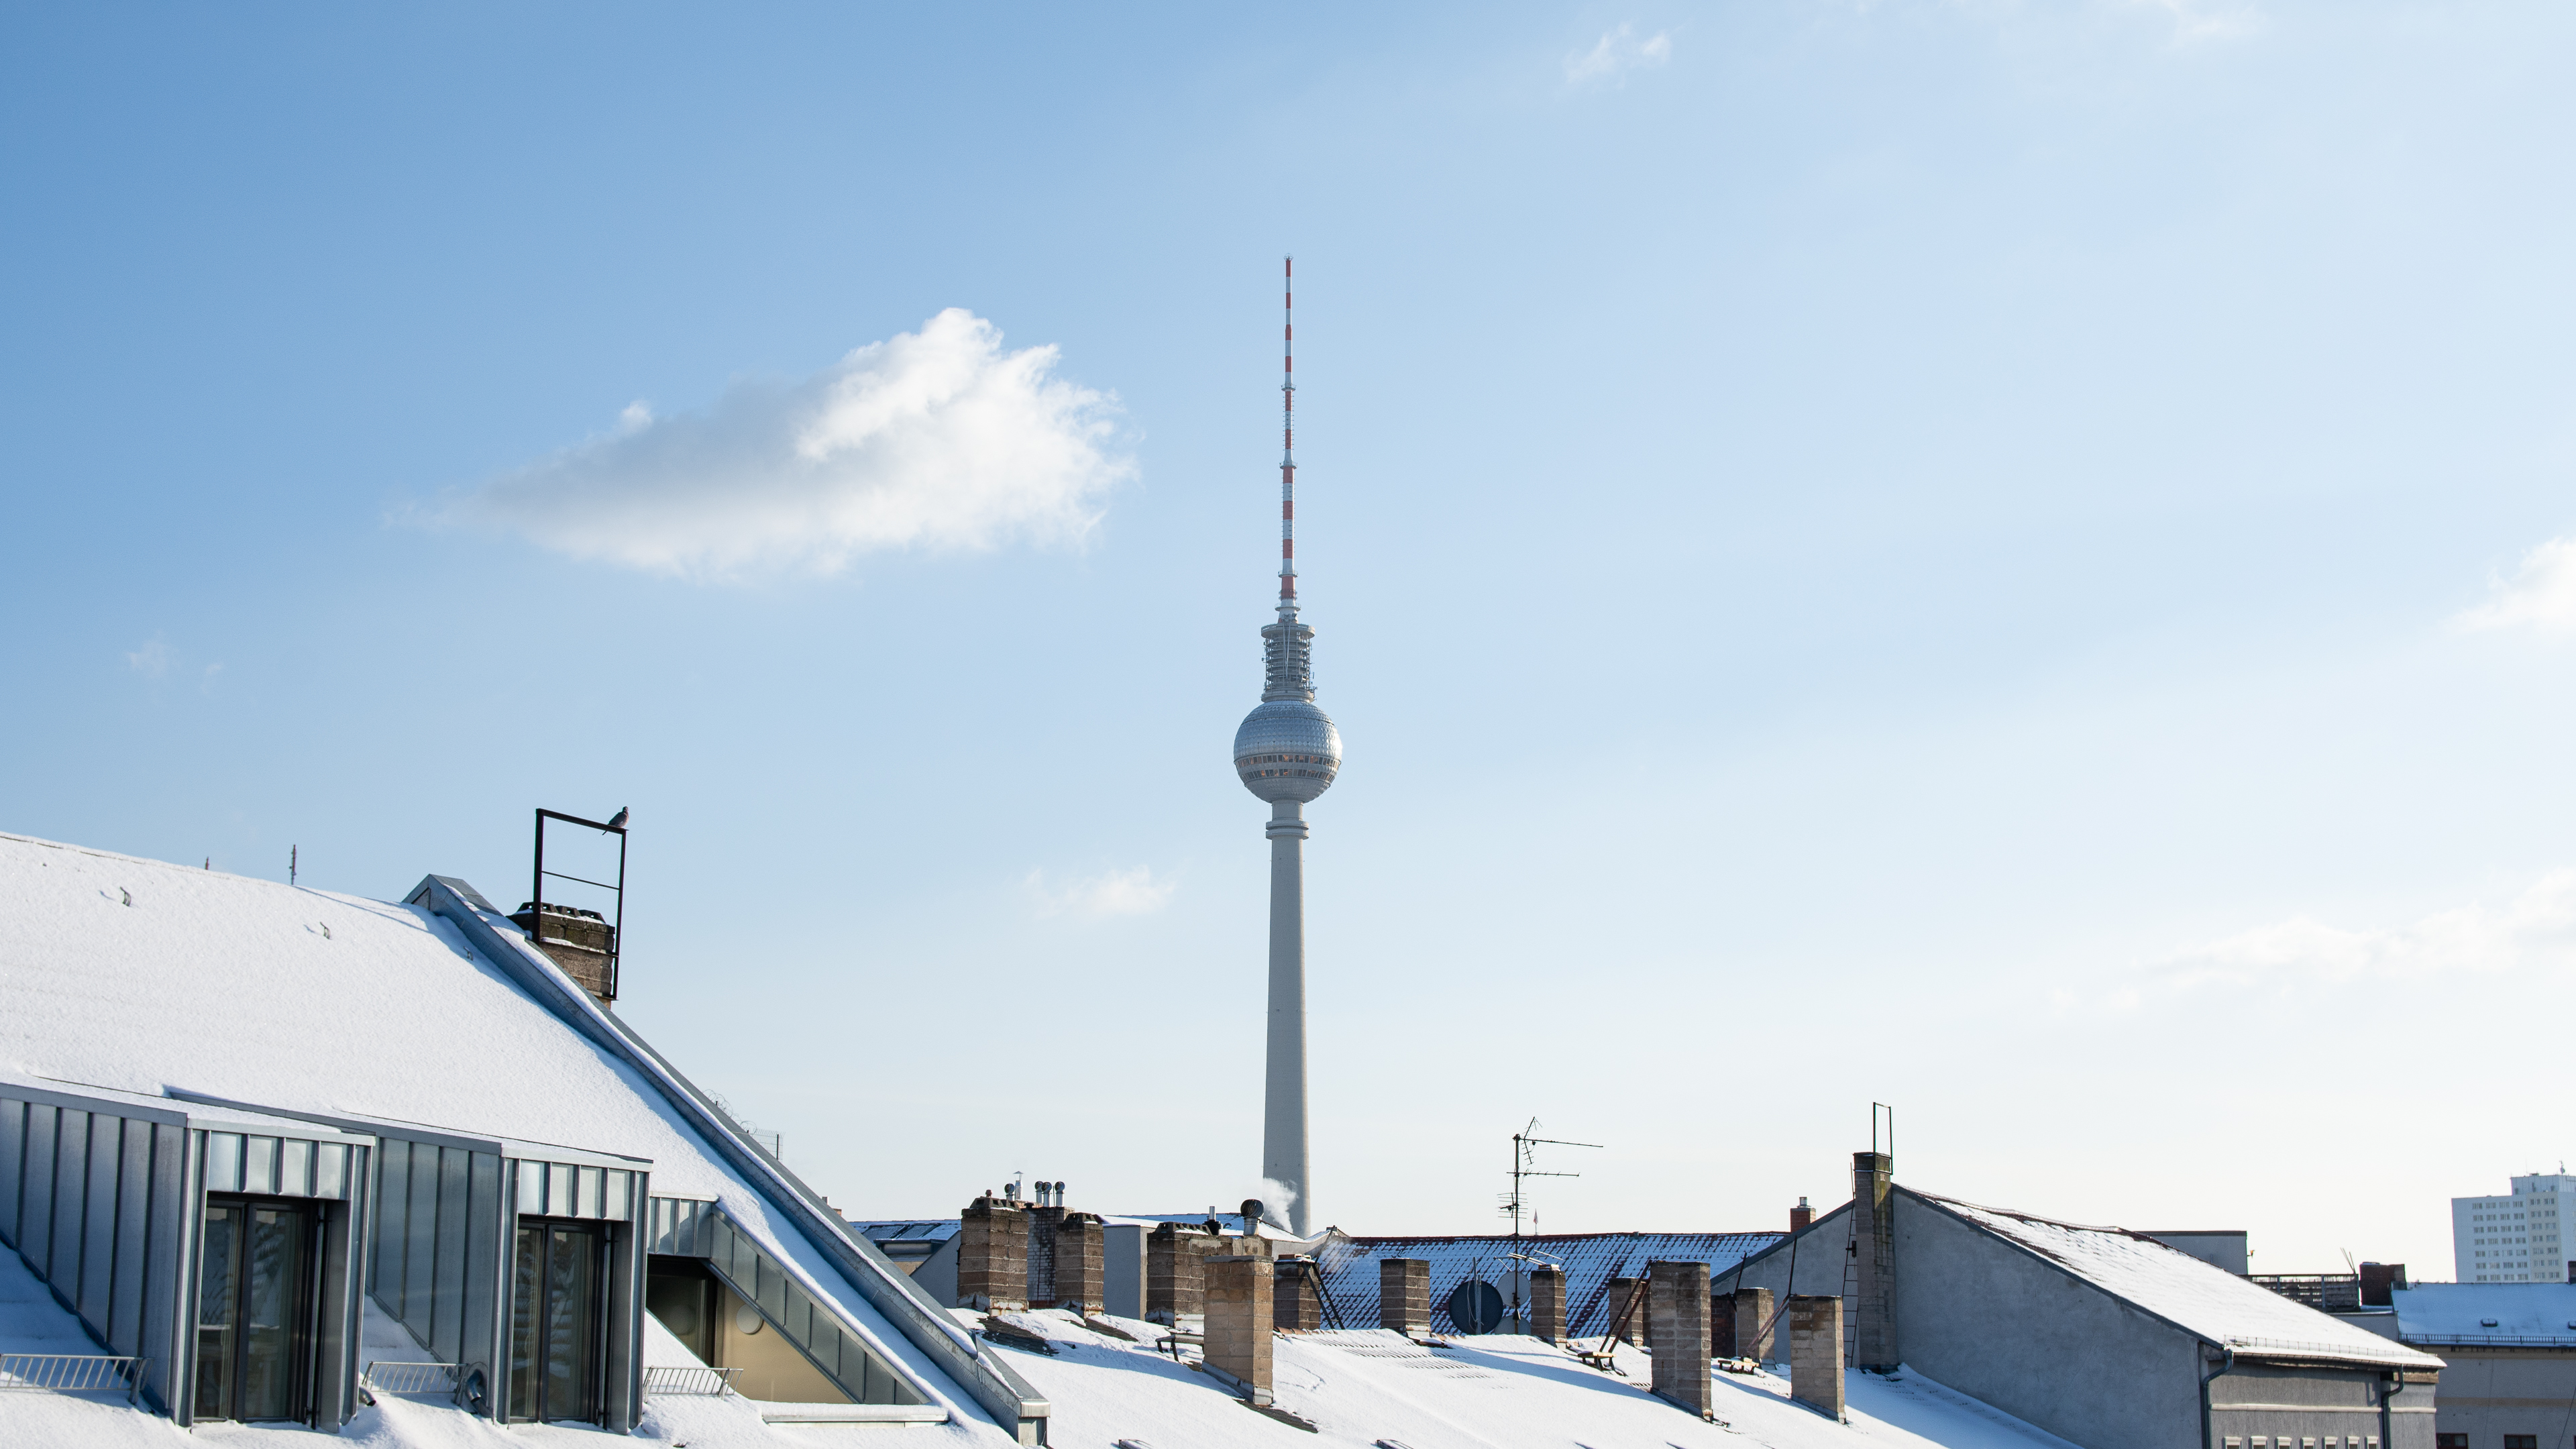 City Berlin Snow Clear Sky Monument Tower Rooftops Radio Tower 3840x2160